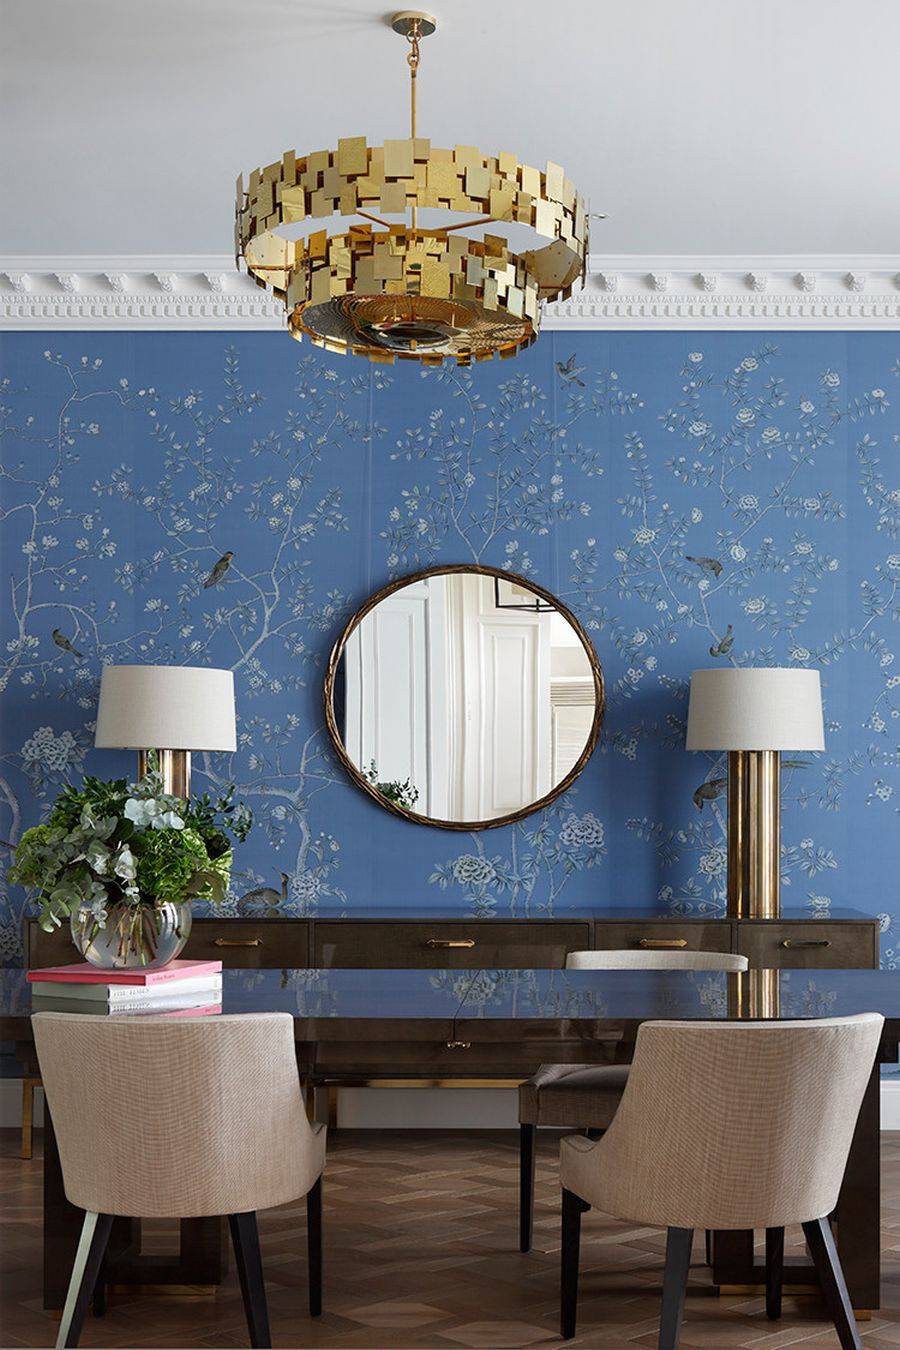 Blue-wallpaper-with-pattern-brings-cheerful-charm-to-this-dining-space-69103